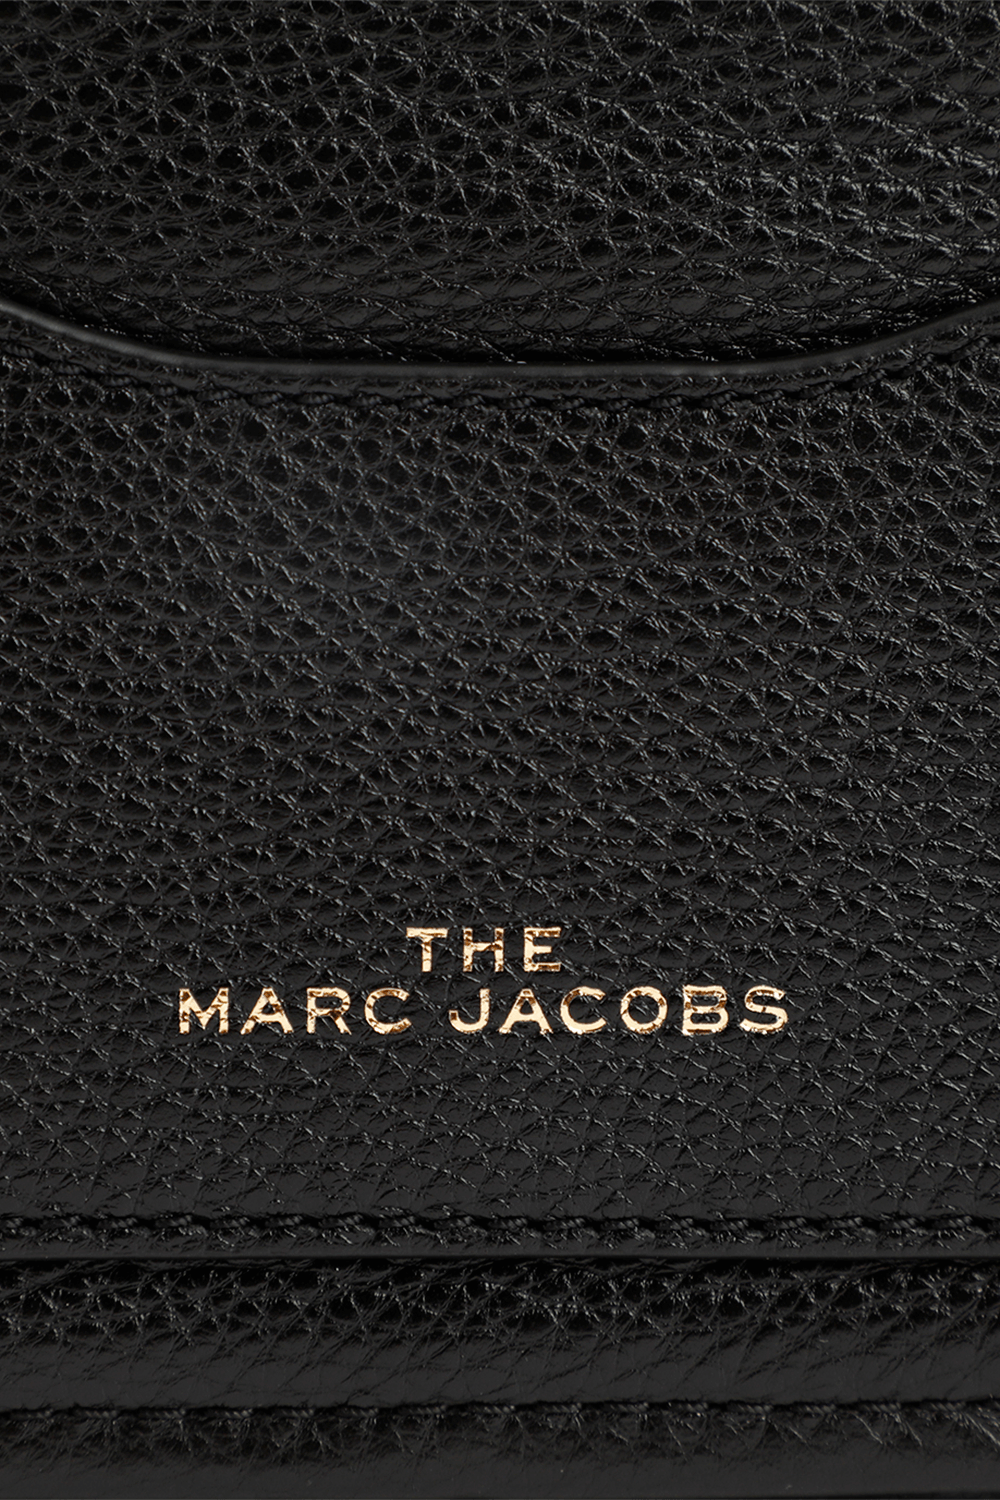 The Snapshot in Black MARC JACOBS